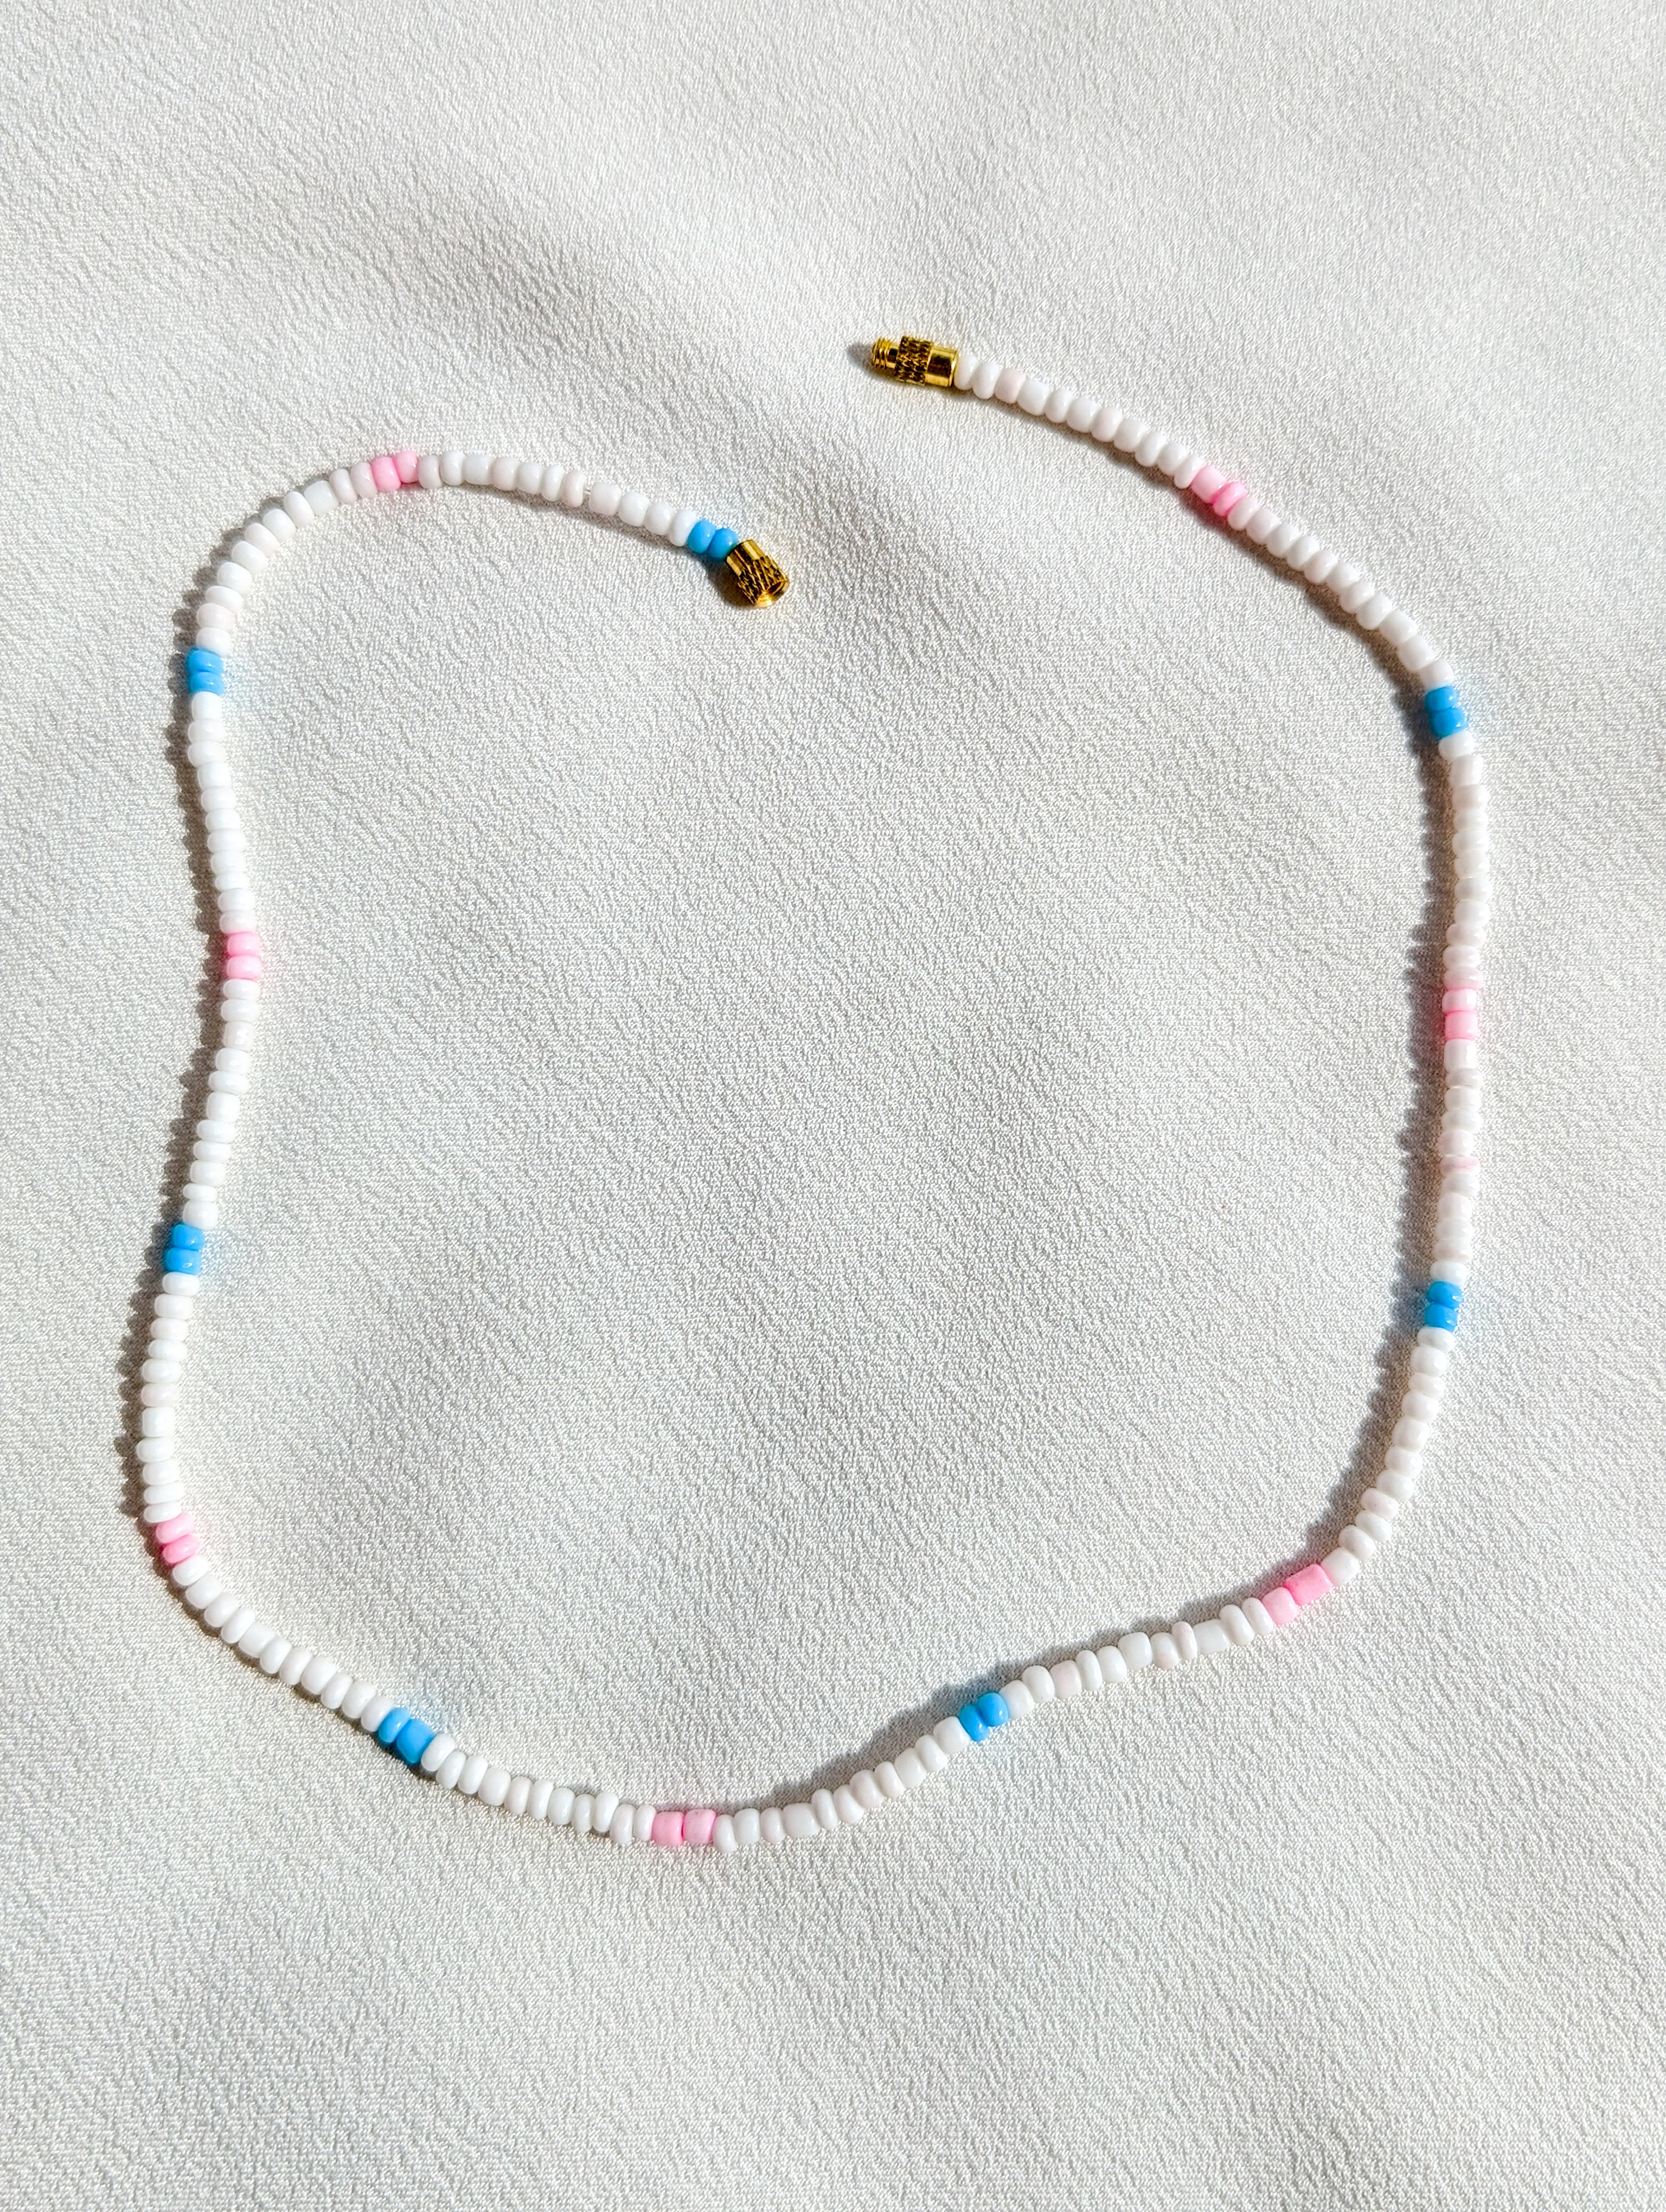 [THE ELEVEN] Necklace: White/Blue + Pink [Small Beads]